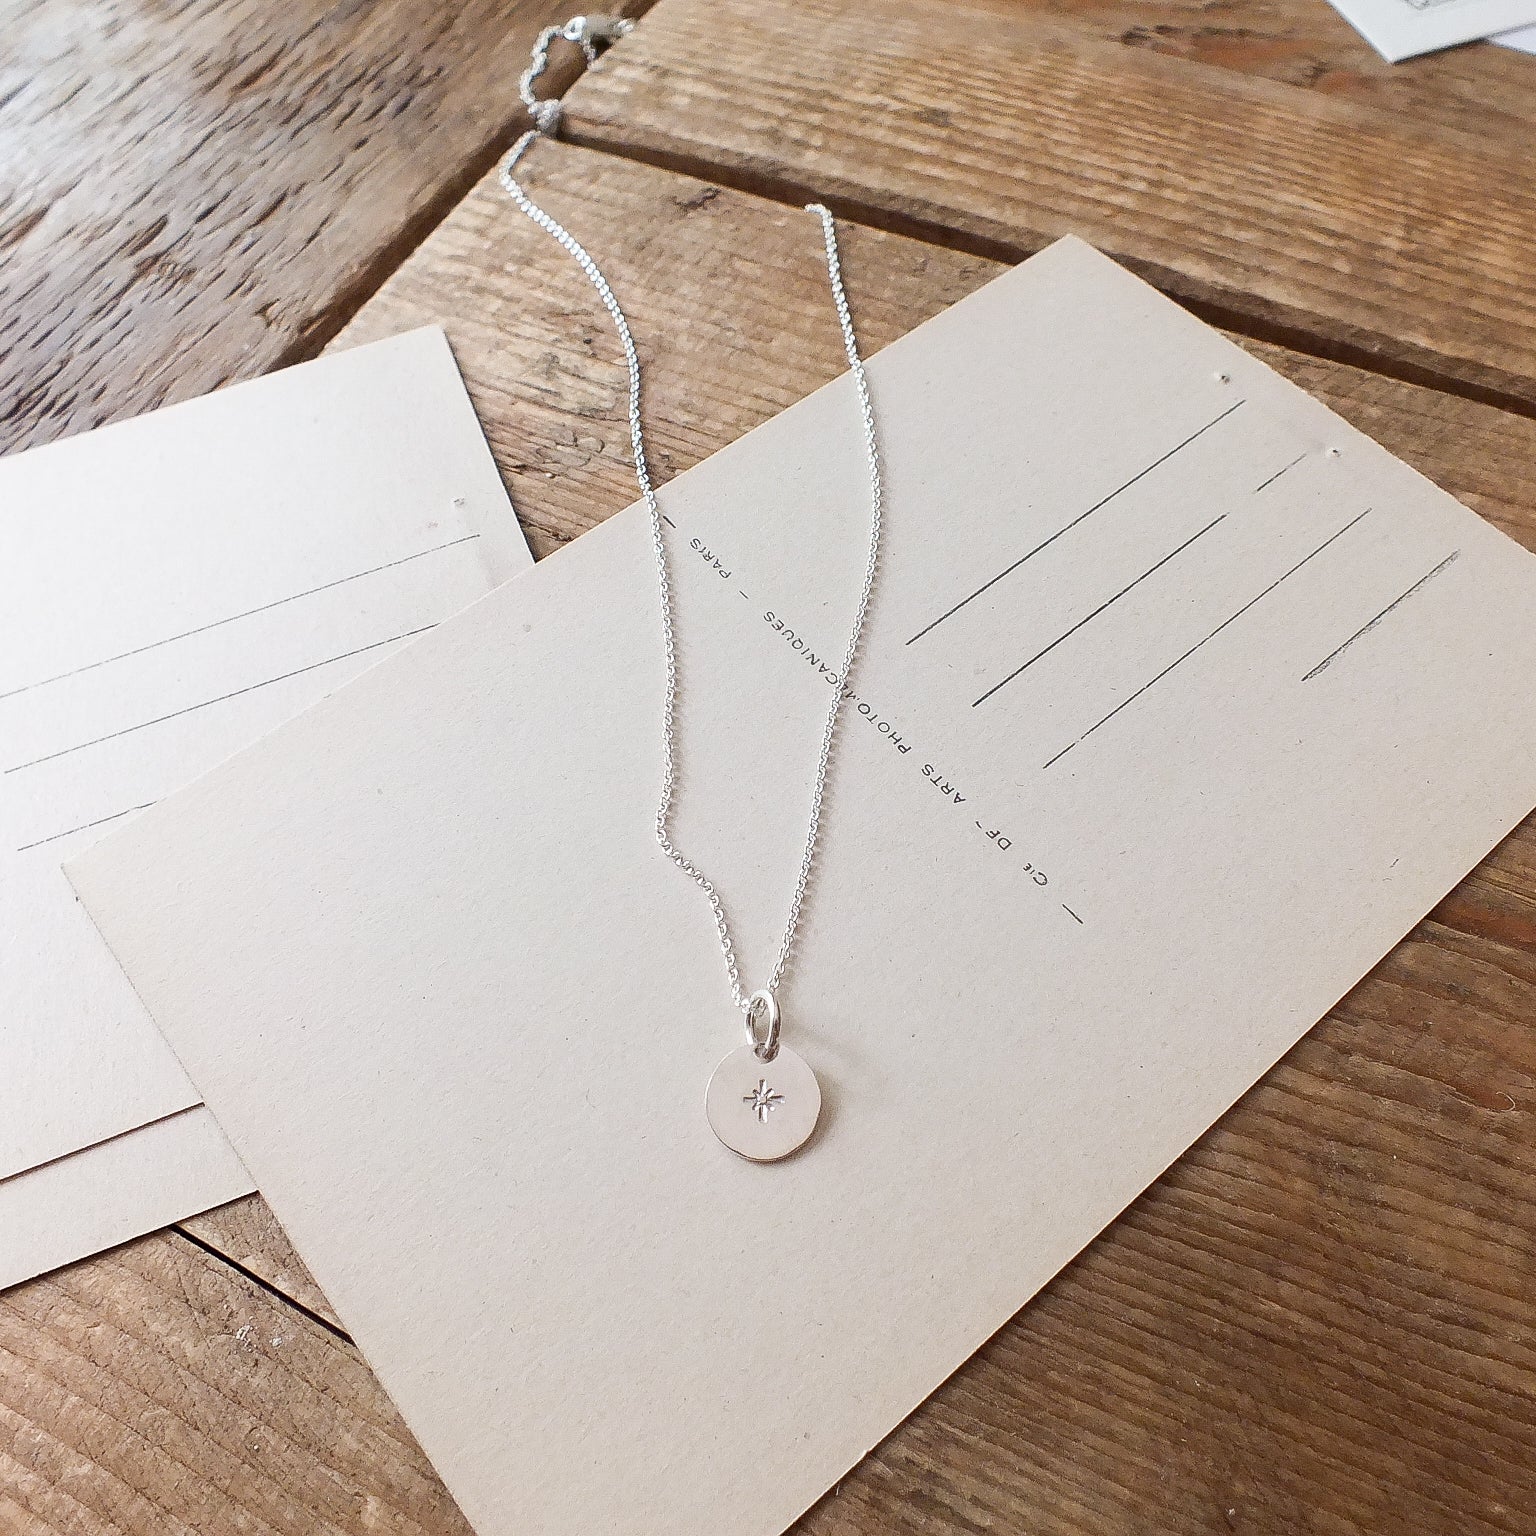 Becoming Jewelry's Light Within Necklace with a starlight charm pendant displayed on a card with necklace length options.